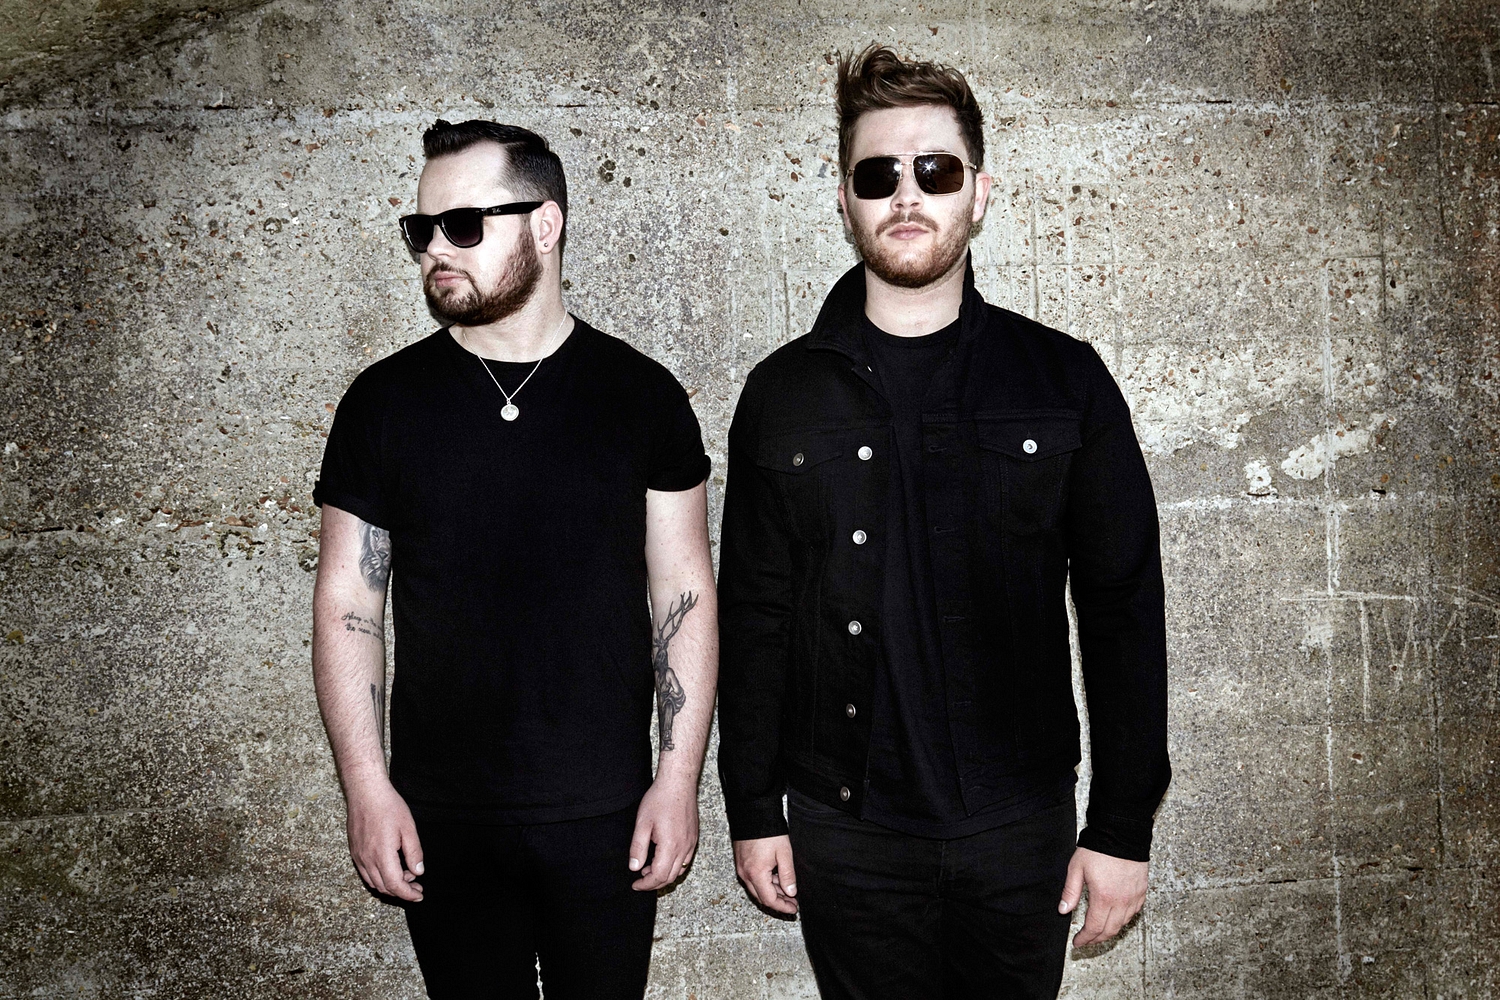 Royal Blood, Jungle, FKA twigs nominated for Mercury Prize 2014